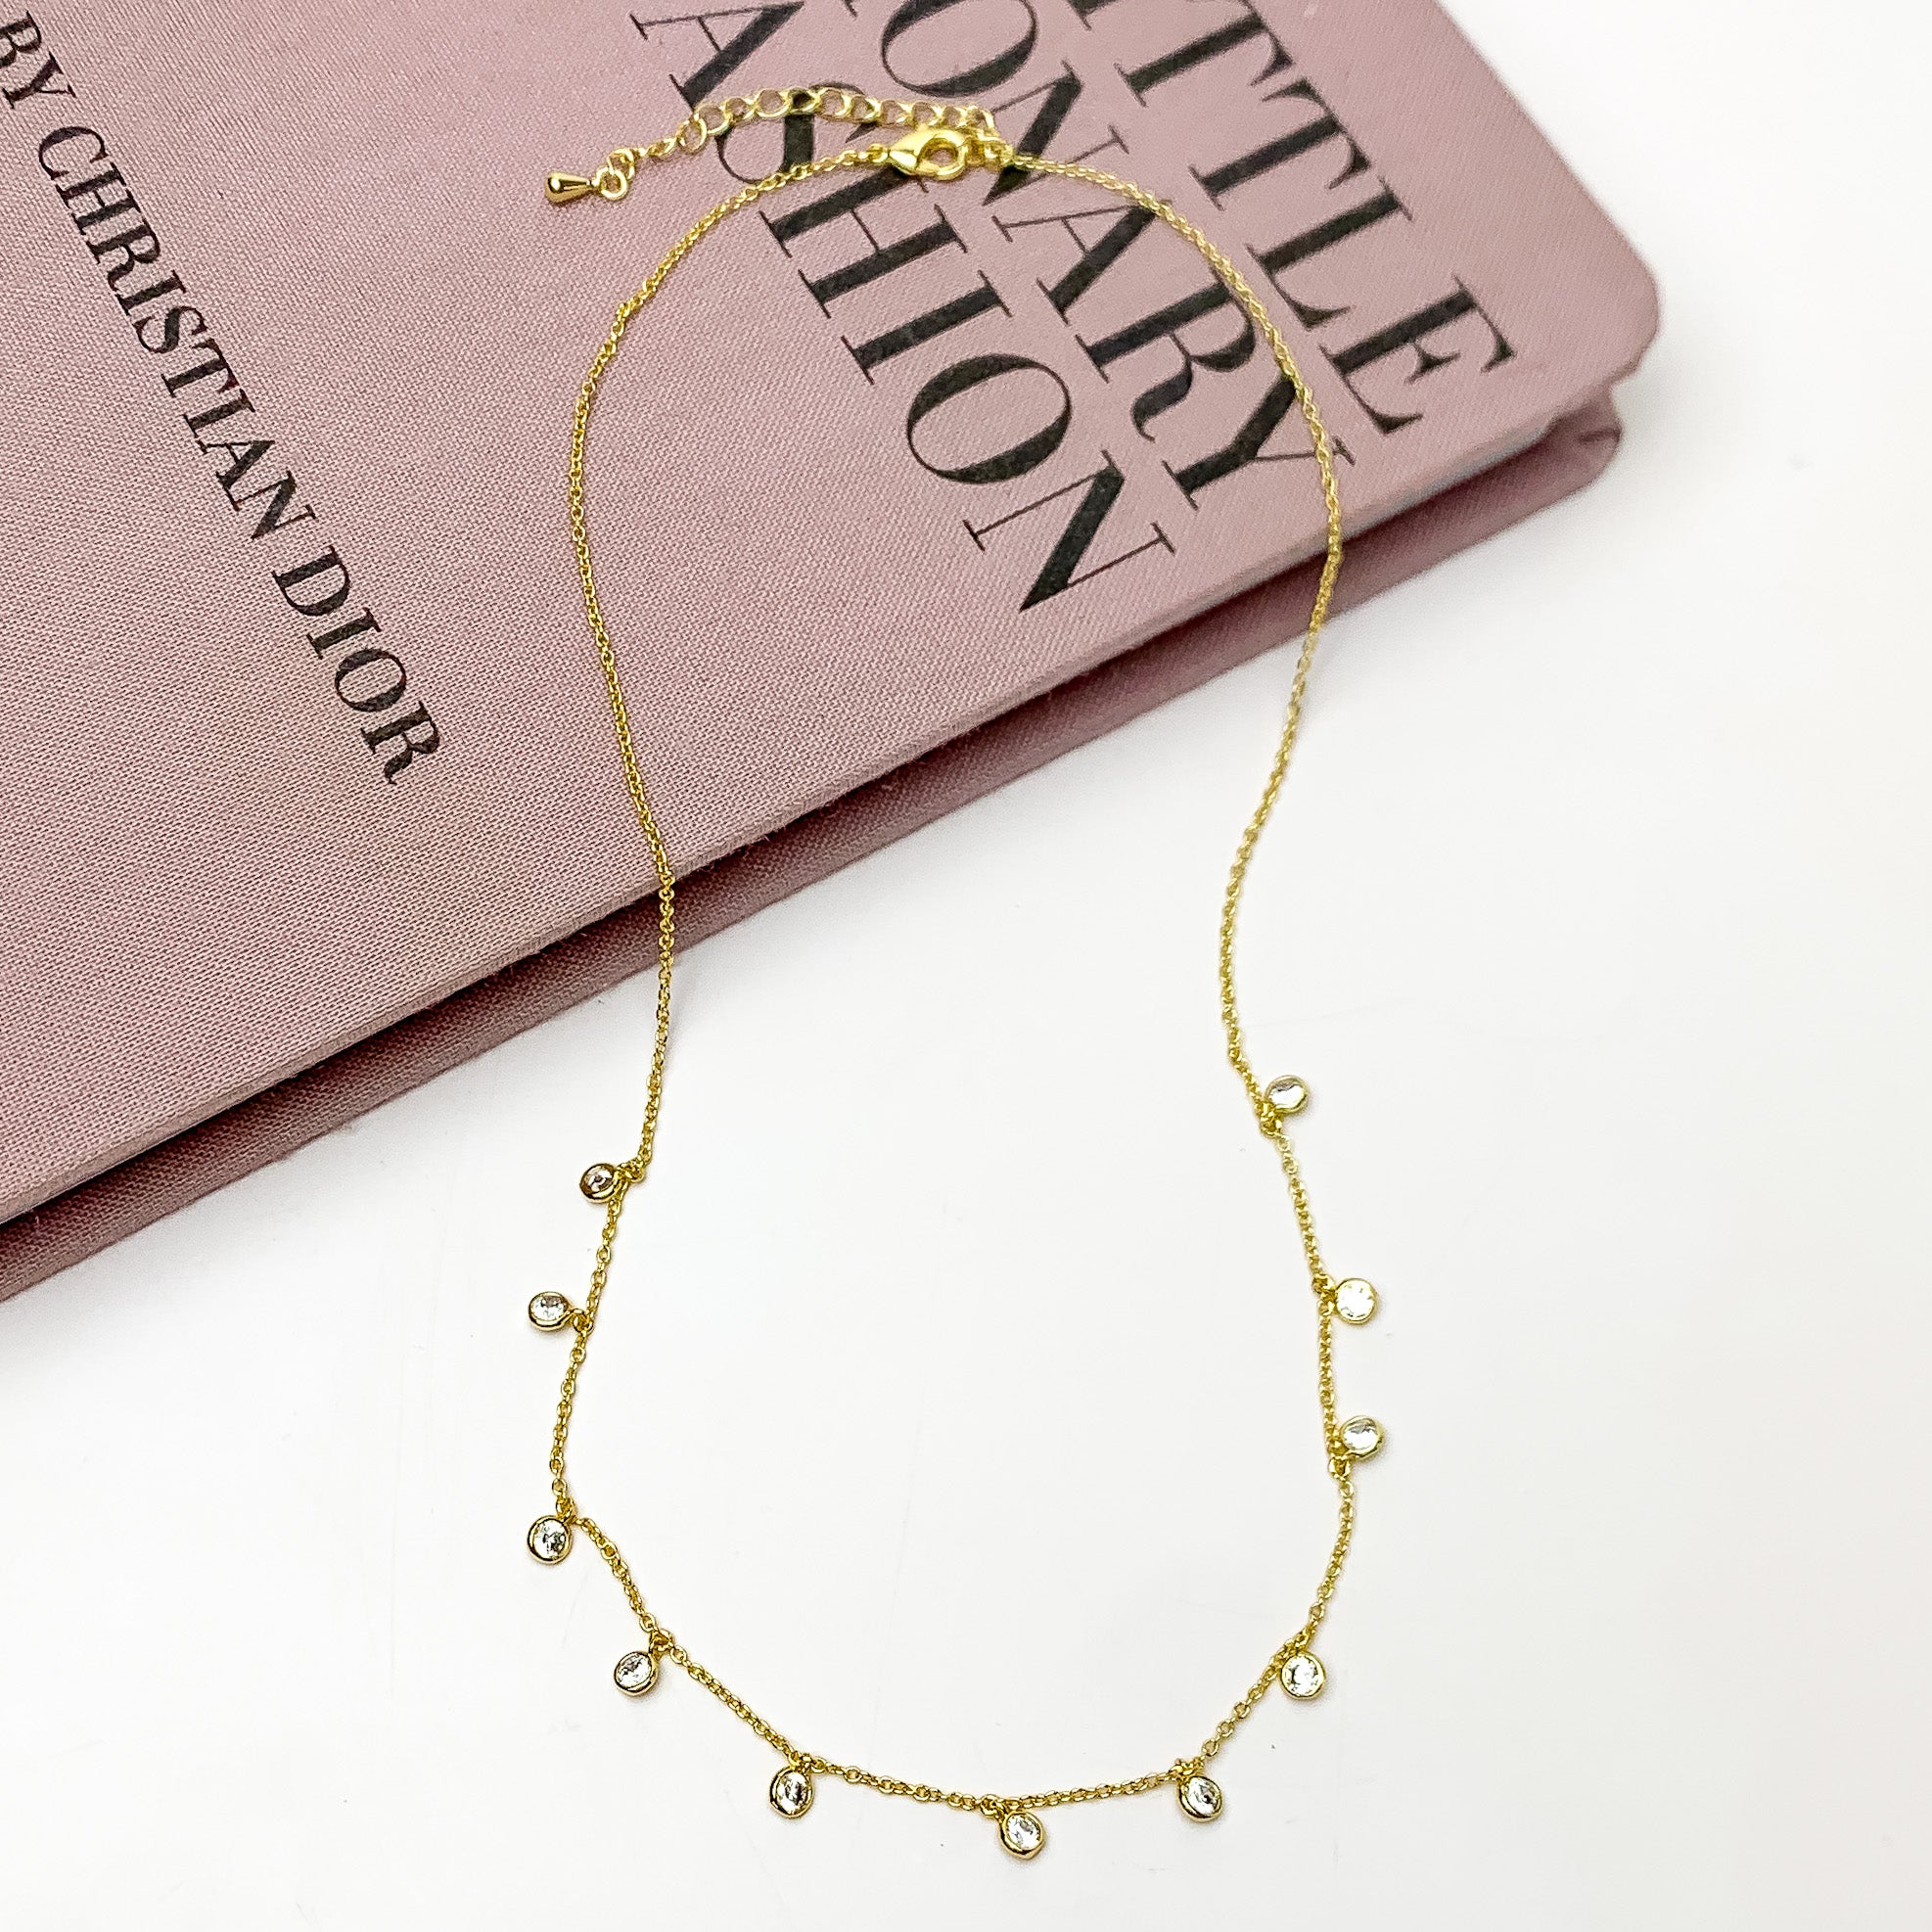 Gold Tone Simple Necklace With Multiple Clear Crystals. Pictured on a white background with the top of the necklace laying on a pink book.